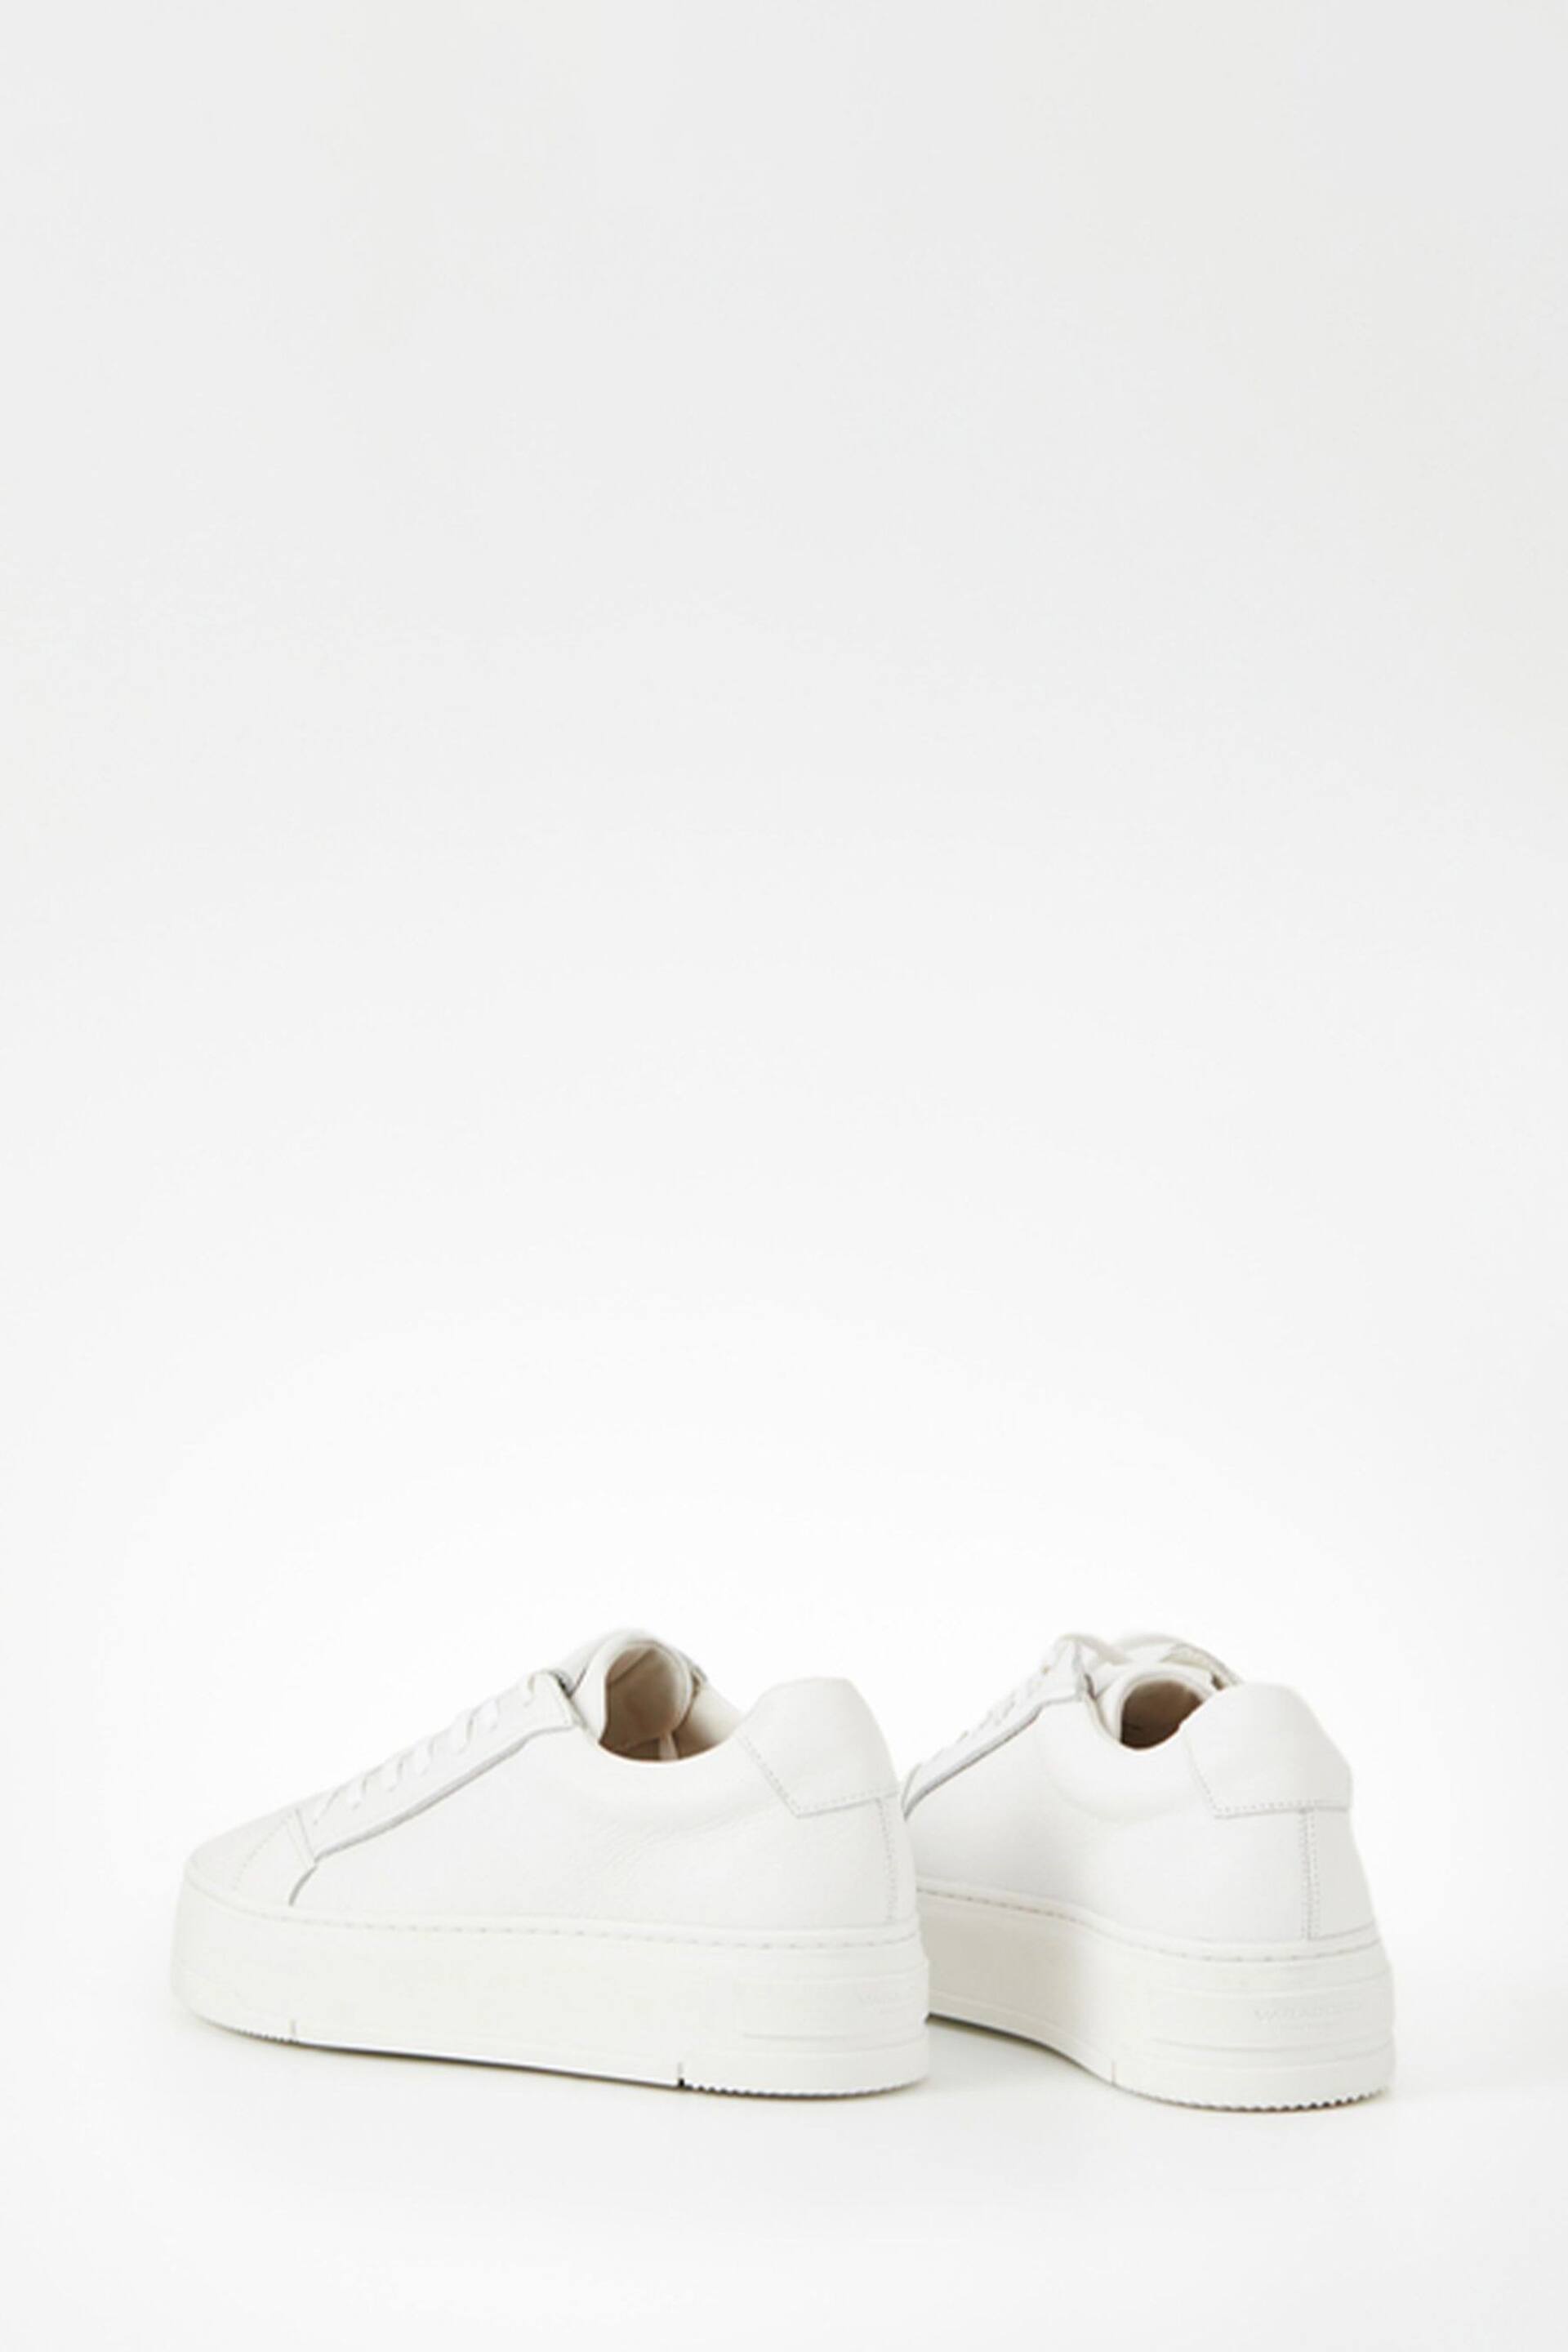 Vagabond Judy White Leather Trainers - Image 3 of 3